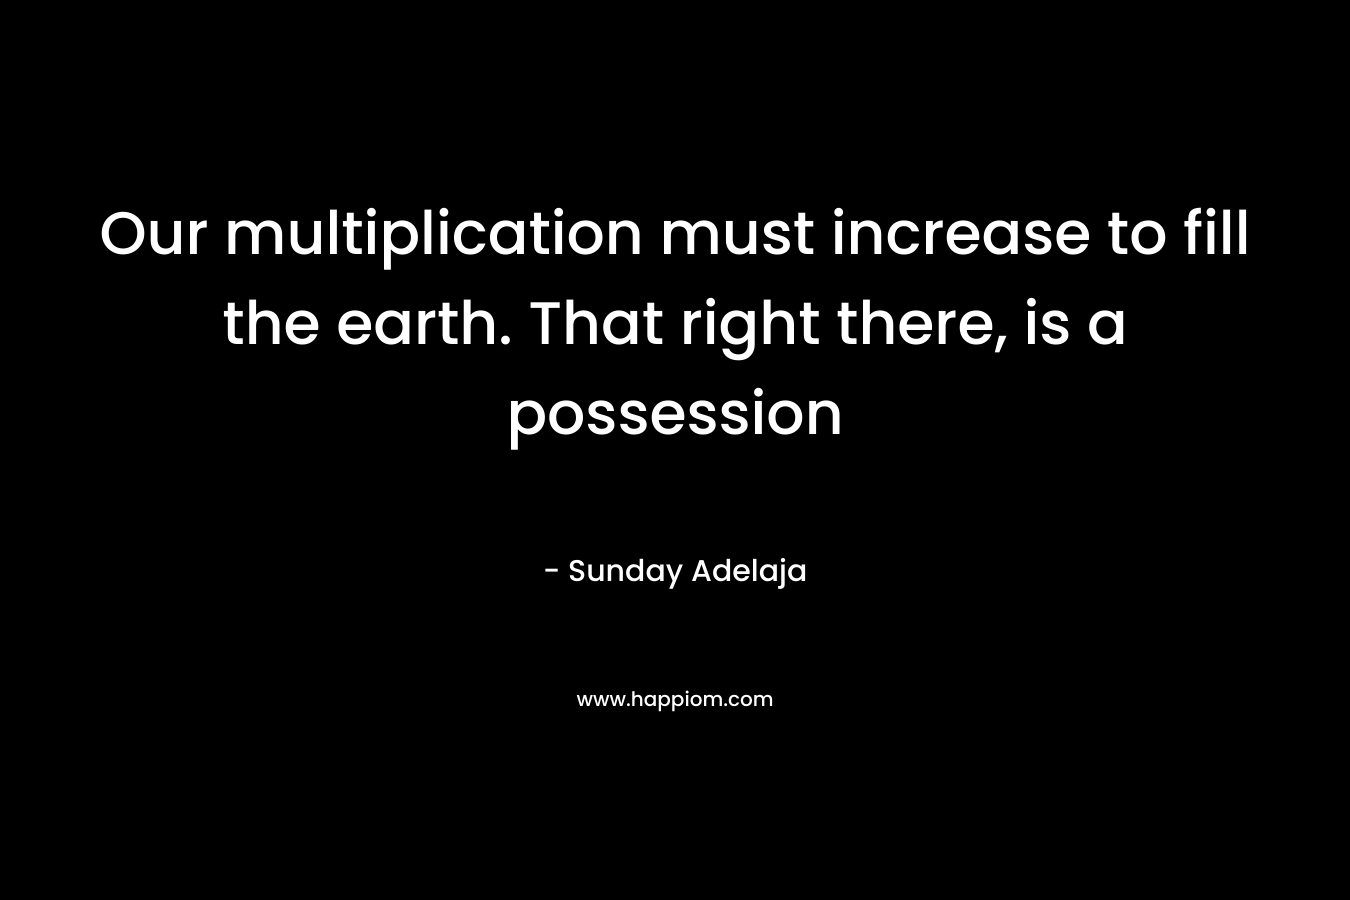 Our multiplication must increase to fill the earth. That right there, is a possession